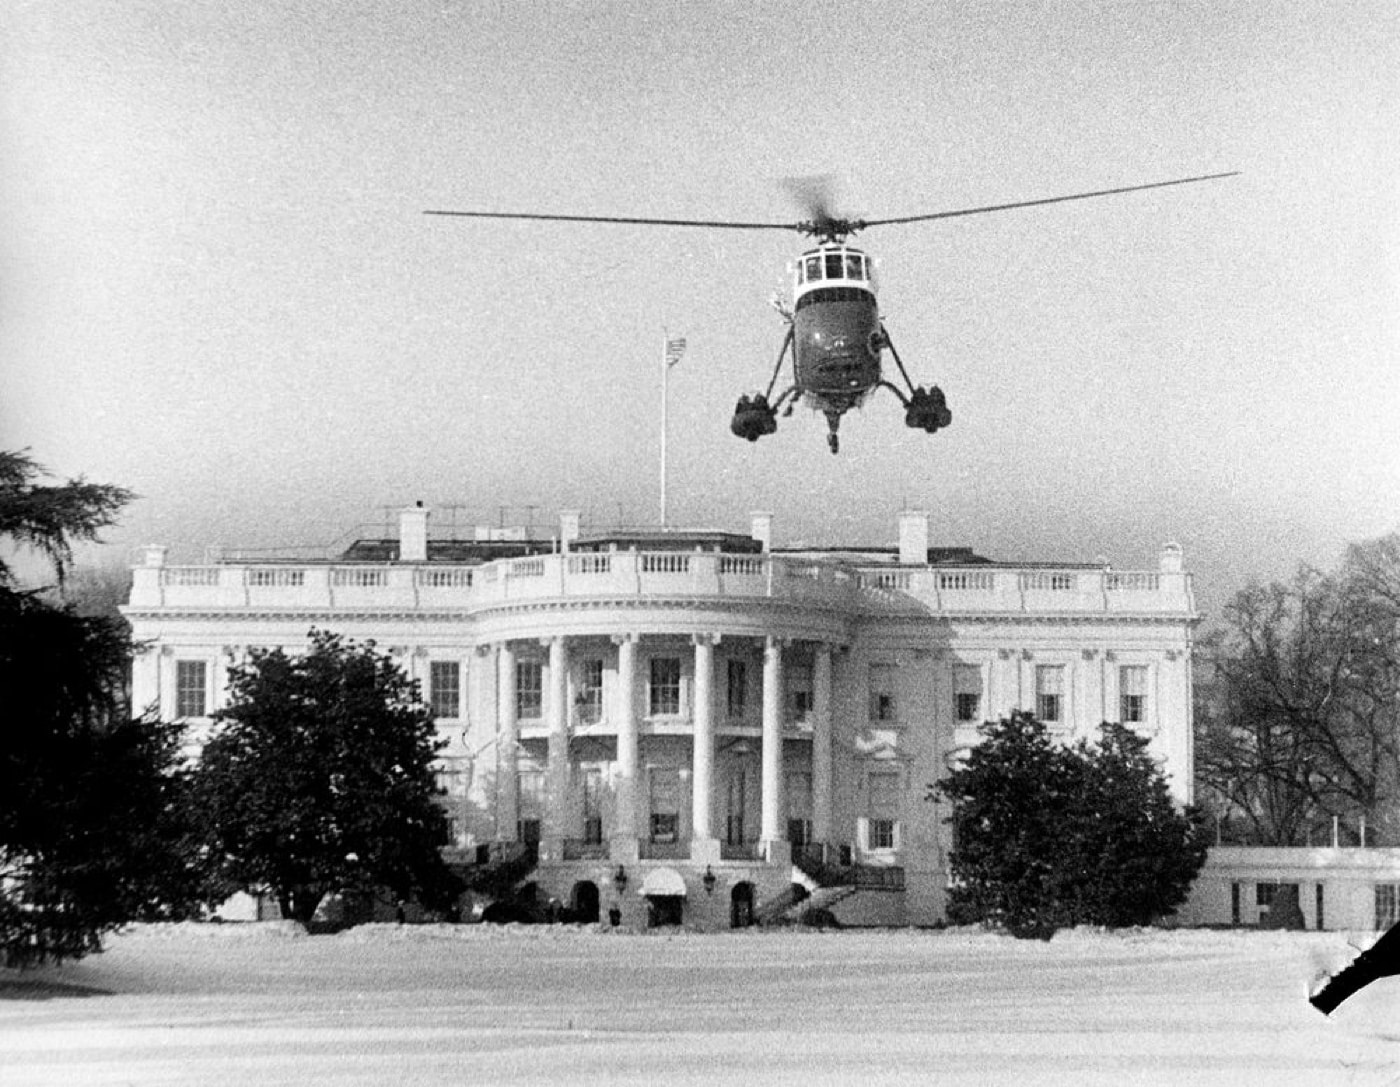 In this photo, the First Family is transported in Marine One. In the background is the White House. Transport versions could carry 12 people — not bad for a piston engine helo. The Choctaw served multiple presidents in addition to its participate in Vietnam. Vietnam was considered by many to be the first helicopter war. 